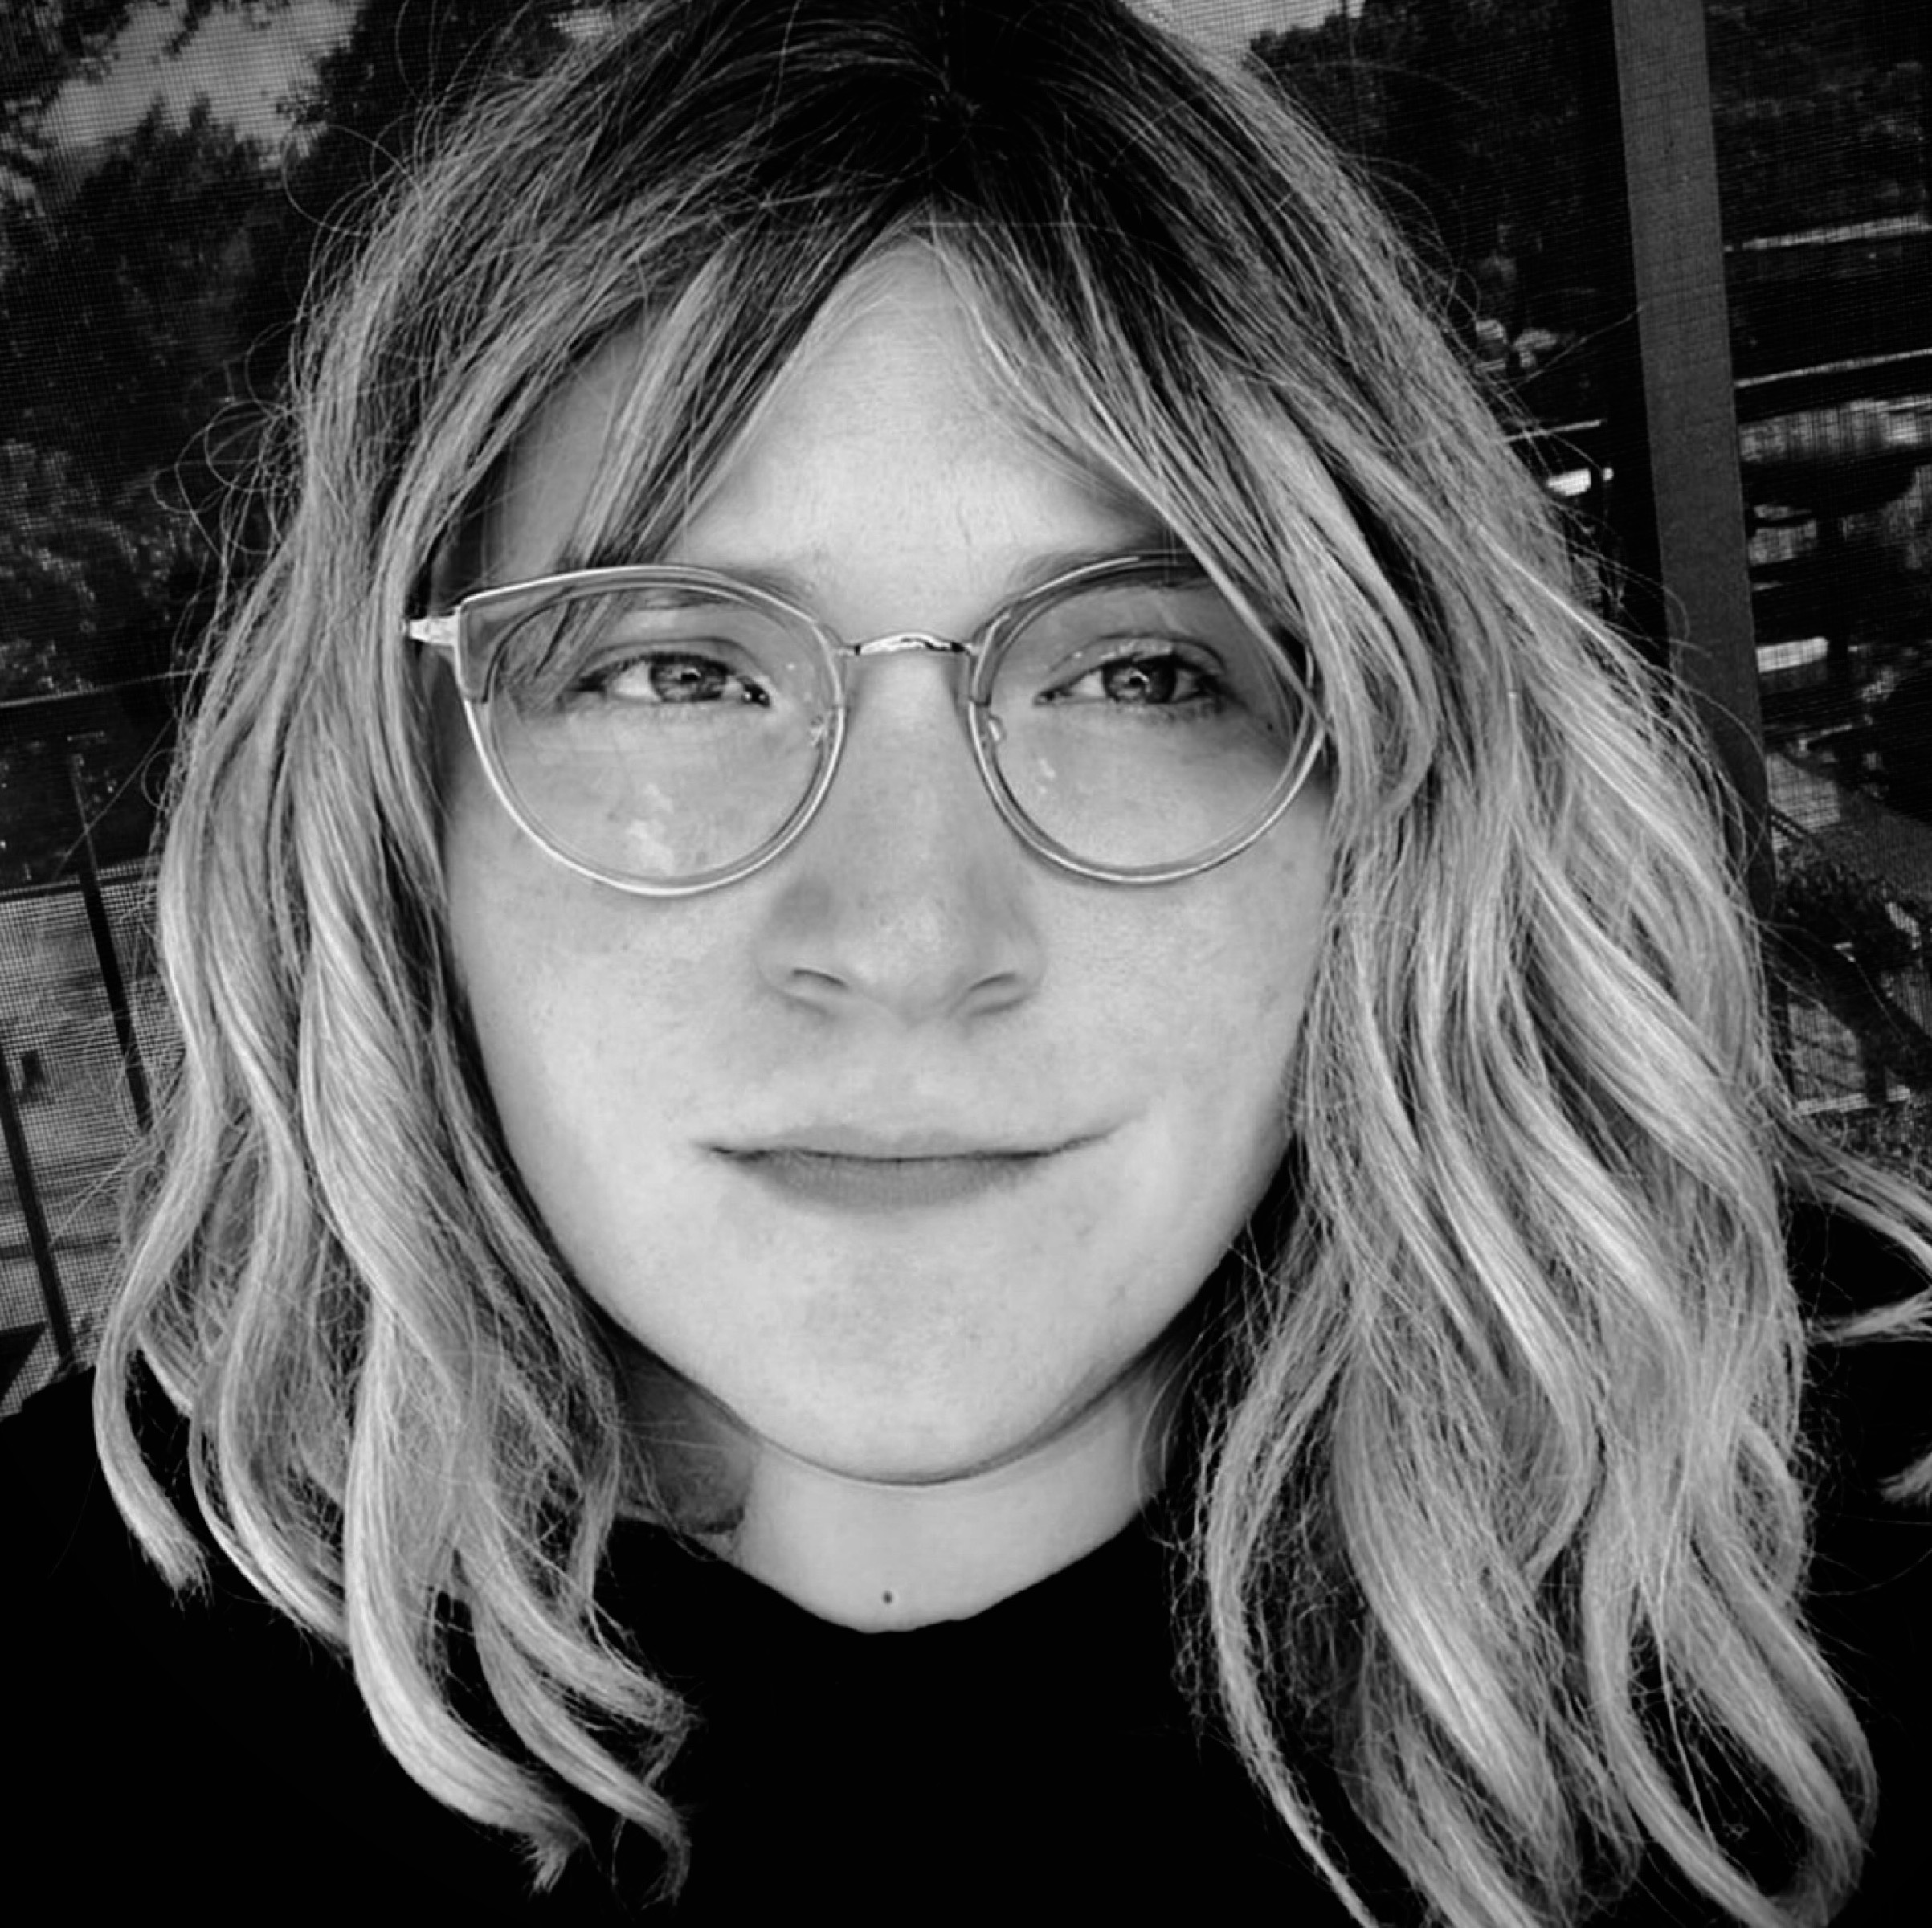 A grayscale photograph of me. I have white skin, silvery hair, and a pair of glasses framing a set of wide eyes. I'm smiling and looking off to the right.